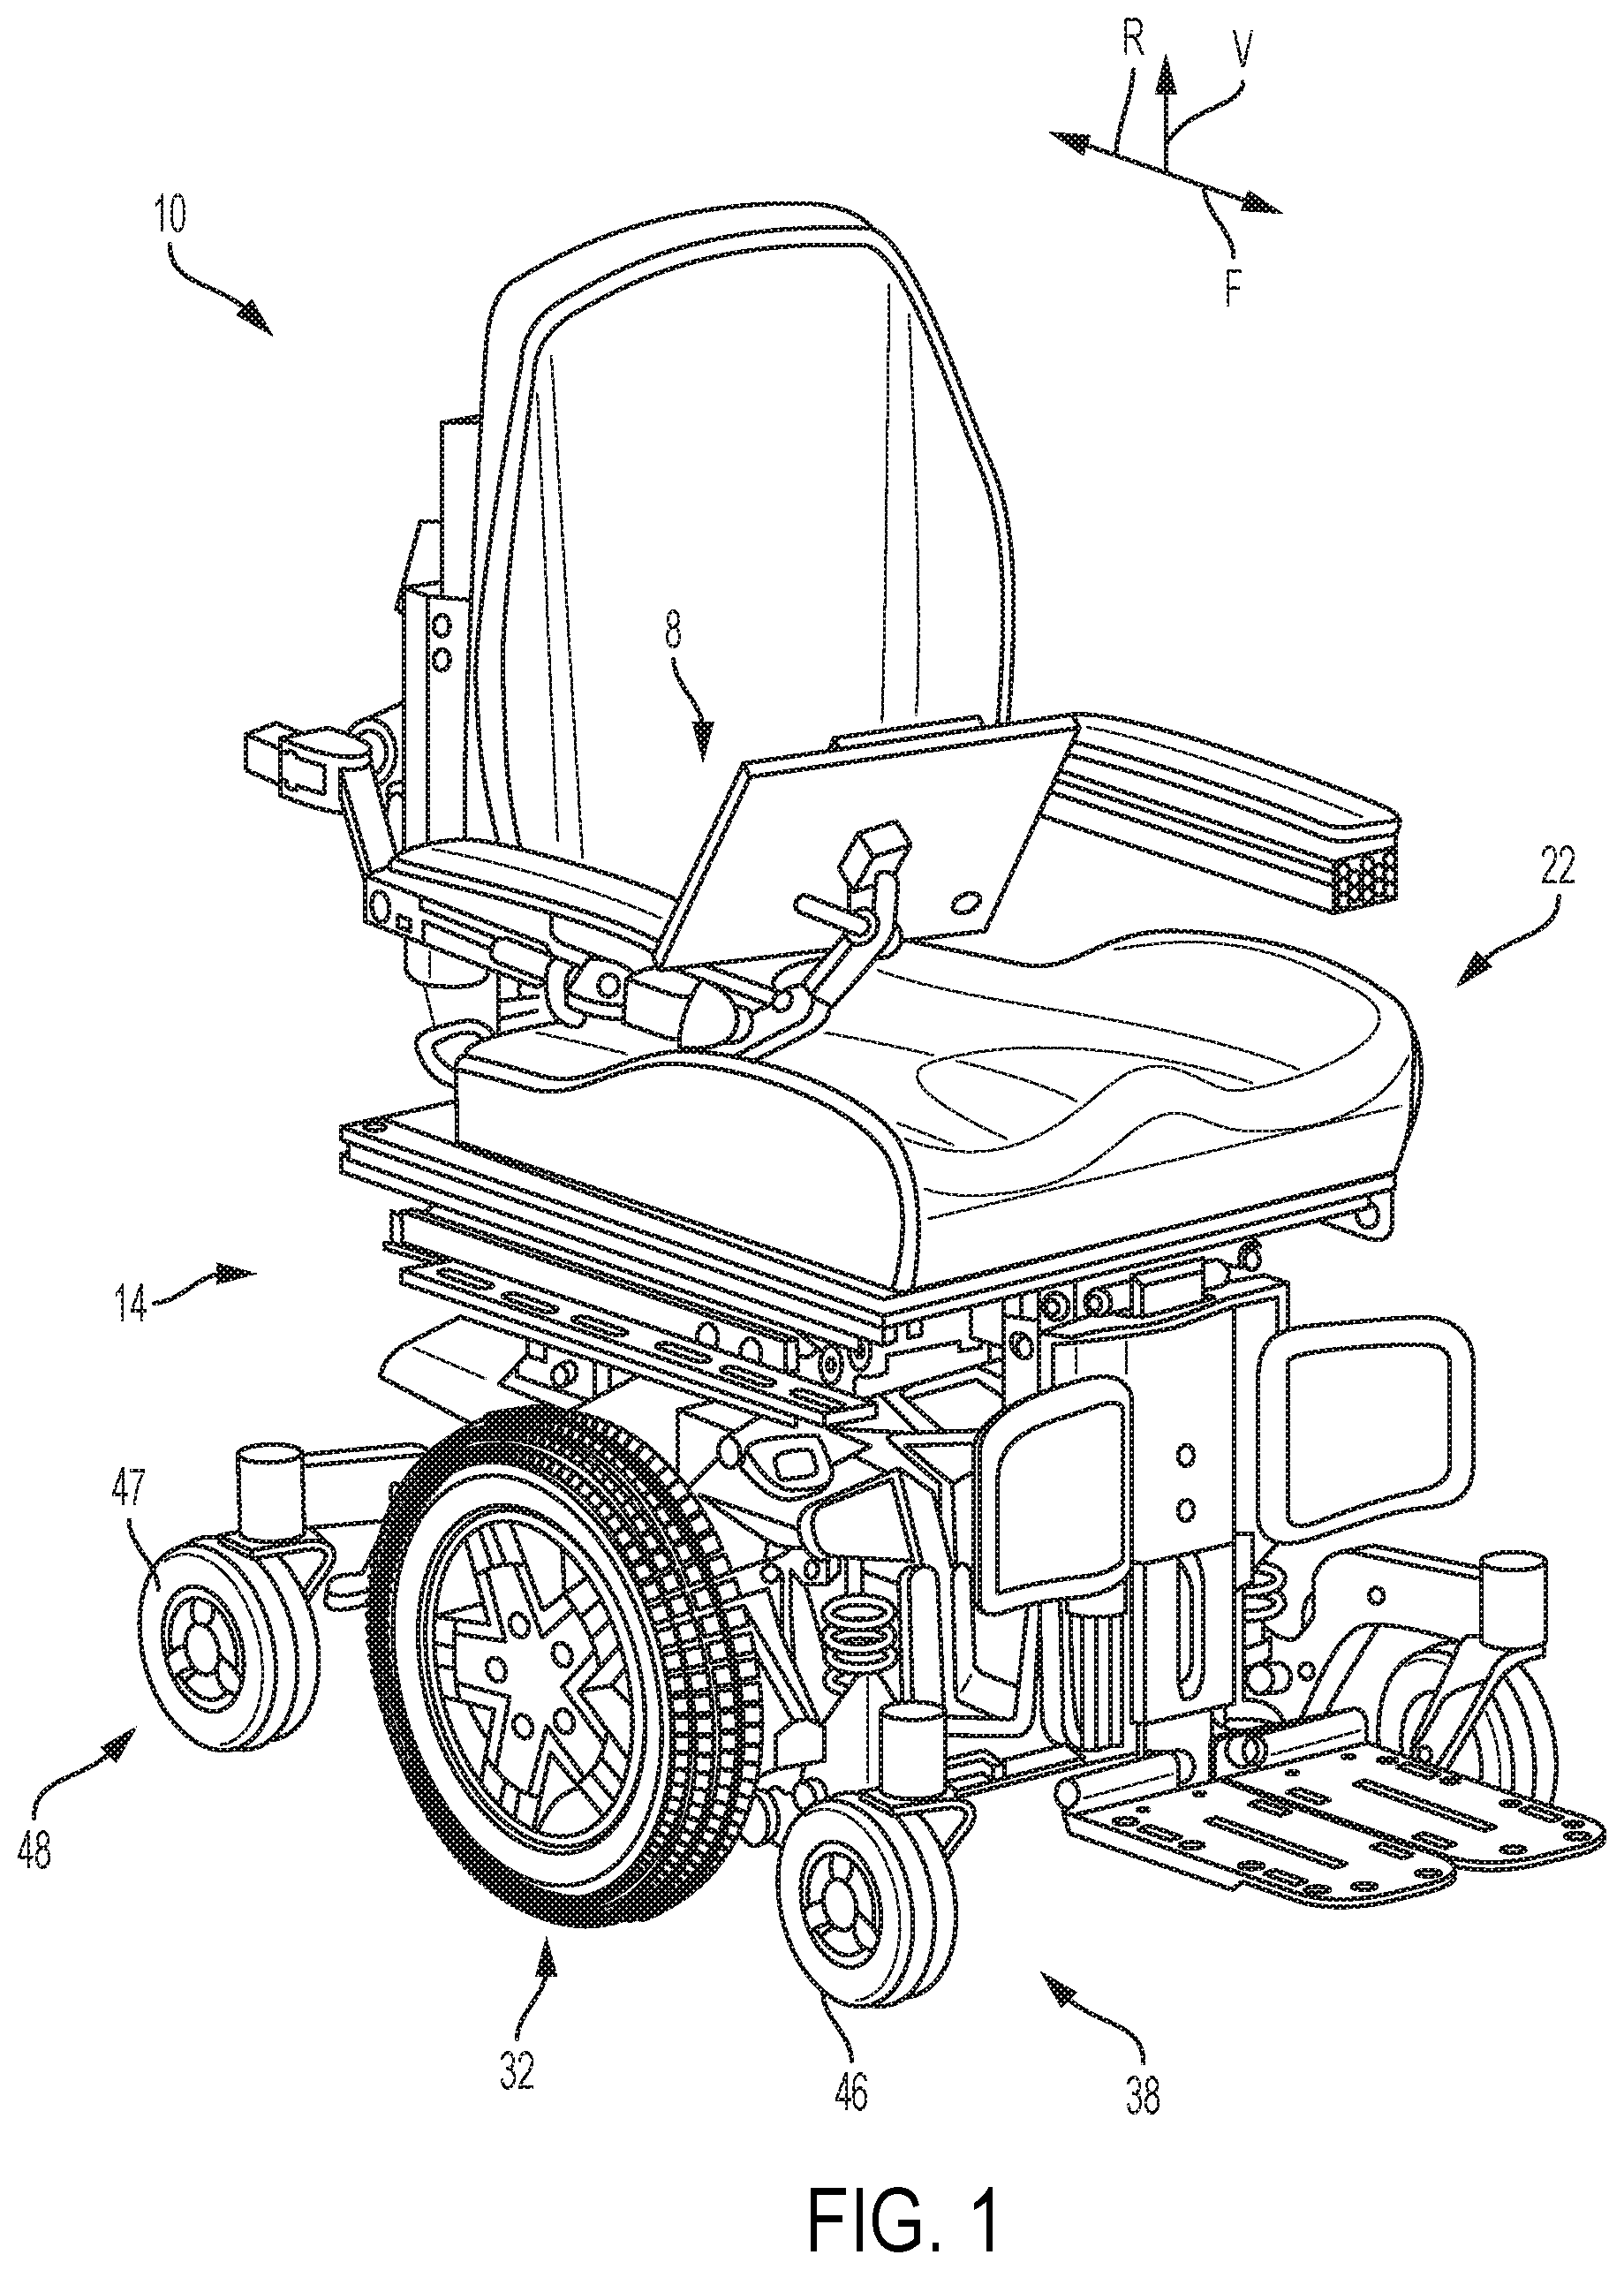 elevated wheelchair